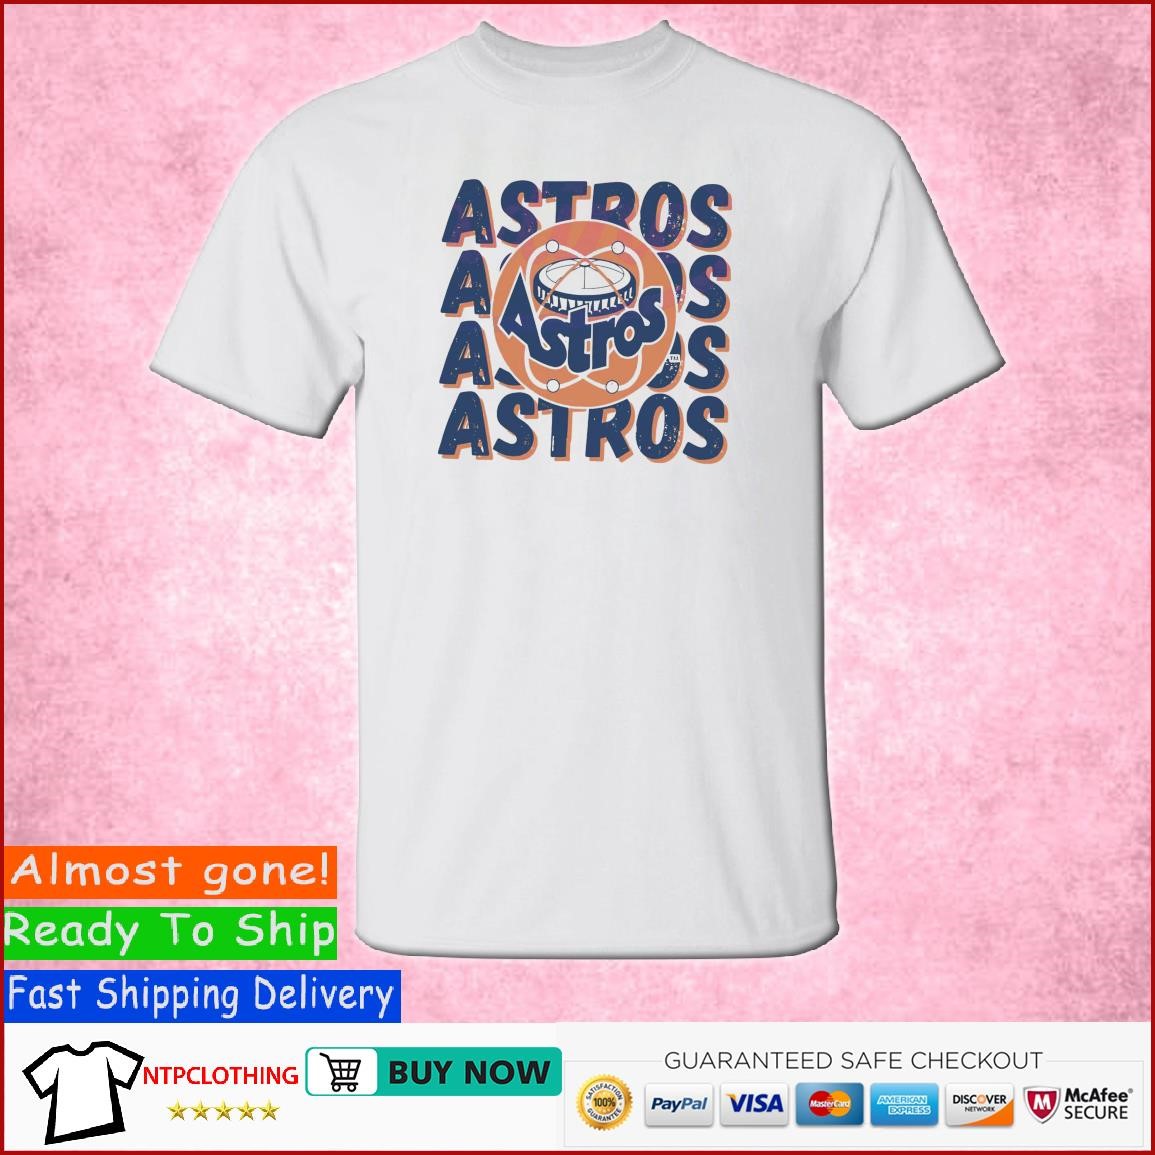 MLB x Topps Houston Astros shirt, hoodie, sweater, long sleeve and tank top